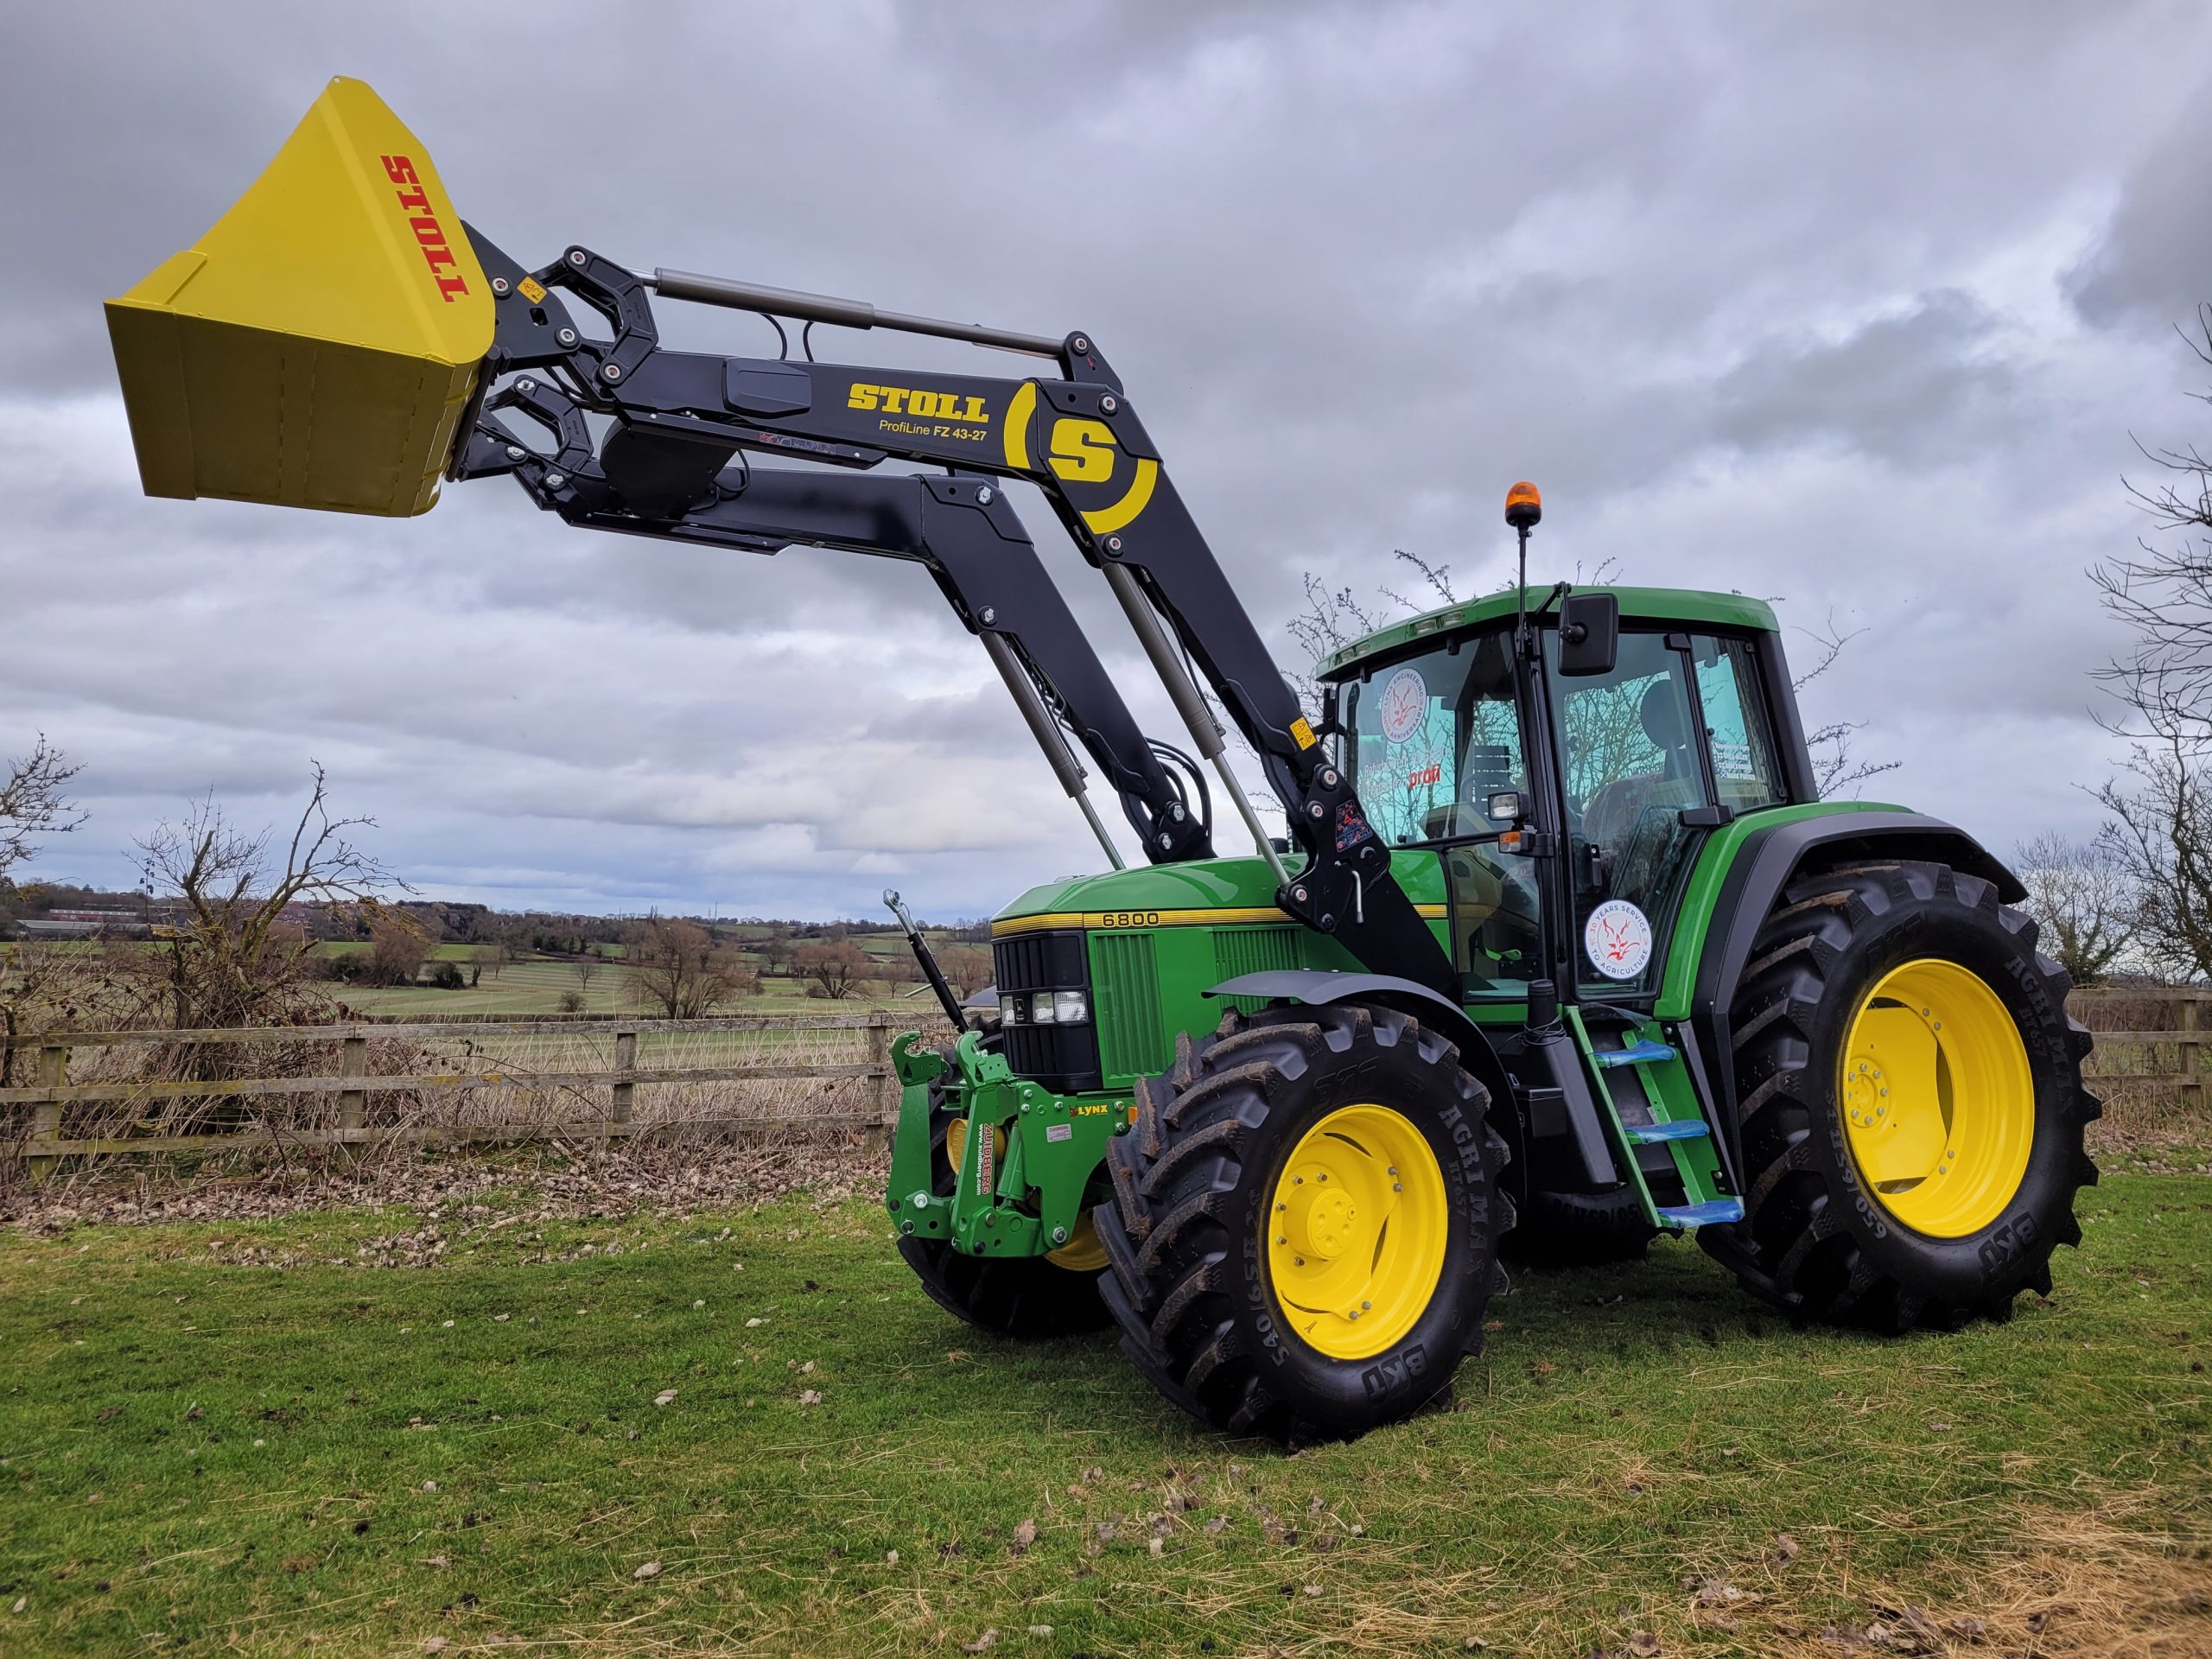 Our JD 6800 restoration – the full story